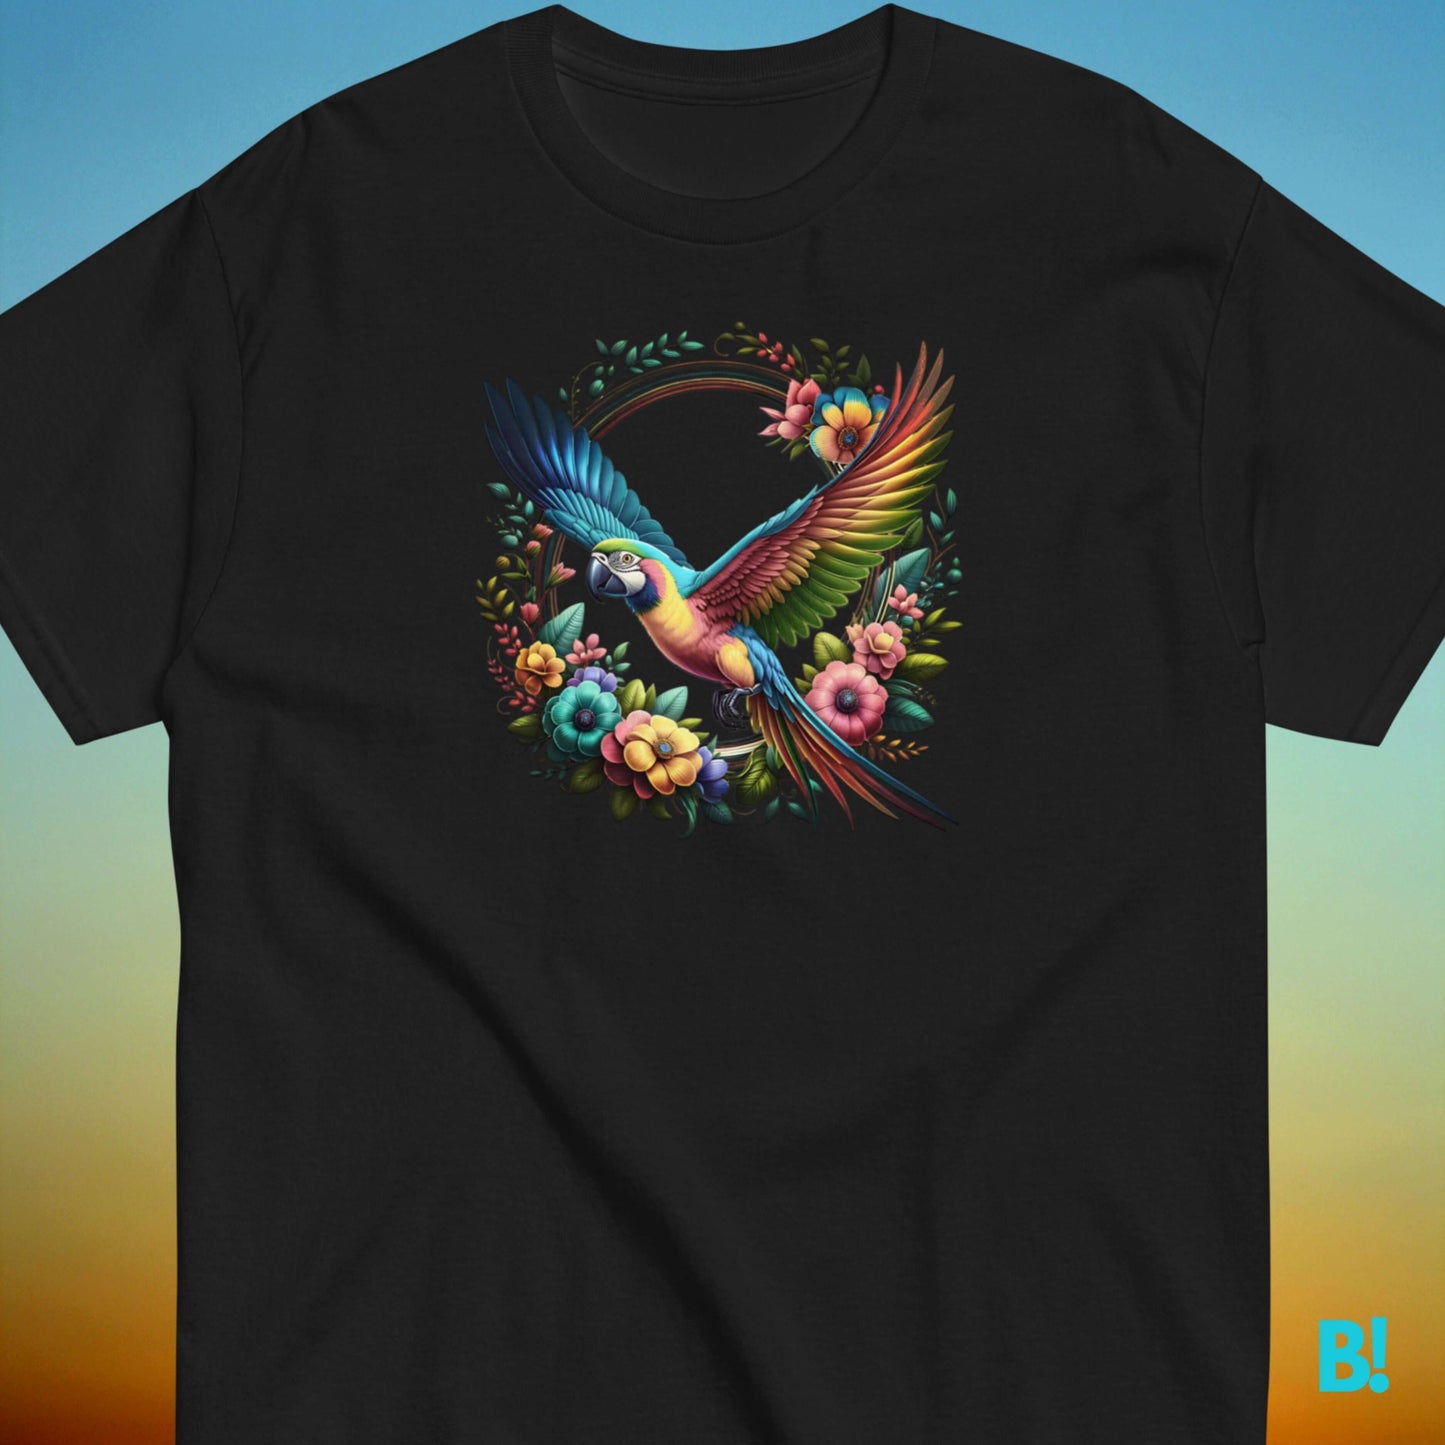 PARROTDISE Tropical Tee: Embrace Summer Style Dive into summer with PARROTDISE's vibrant tropical t-shirt. Available in S-XXXL, enjoy paradise in comfort & color. Ideal beachwear for all. €29.50 B!NKY Comfywear